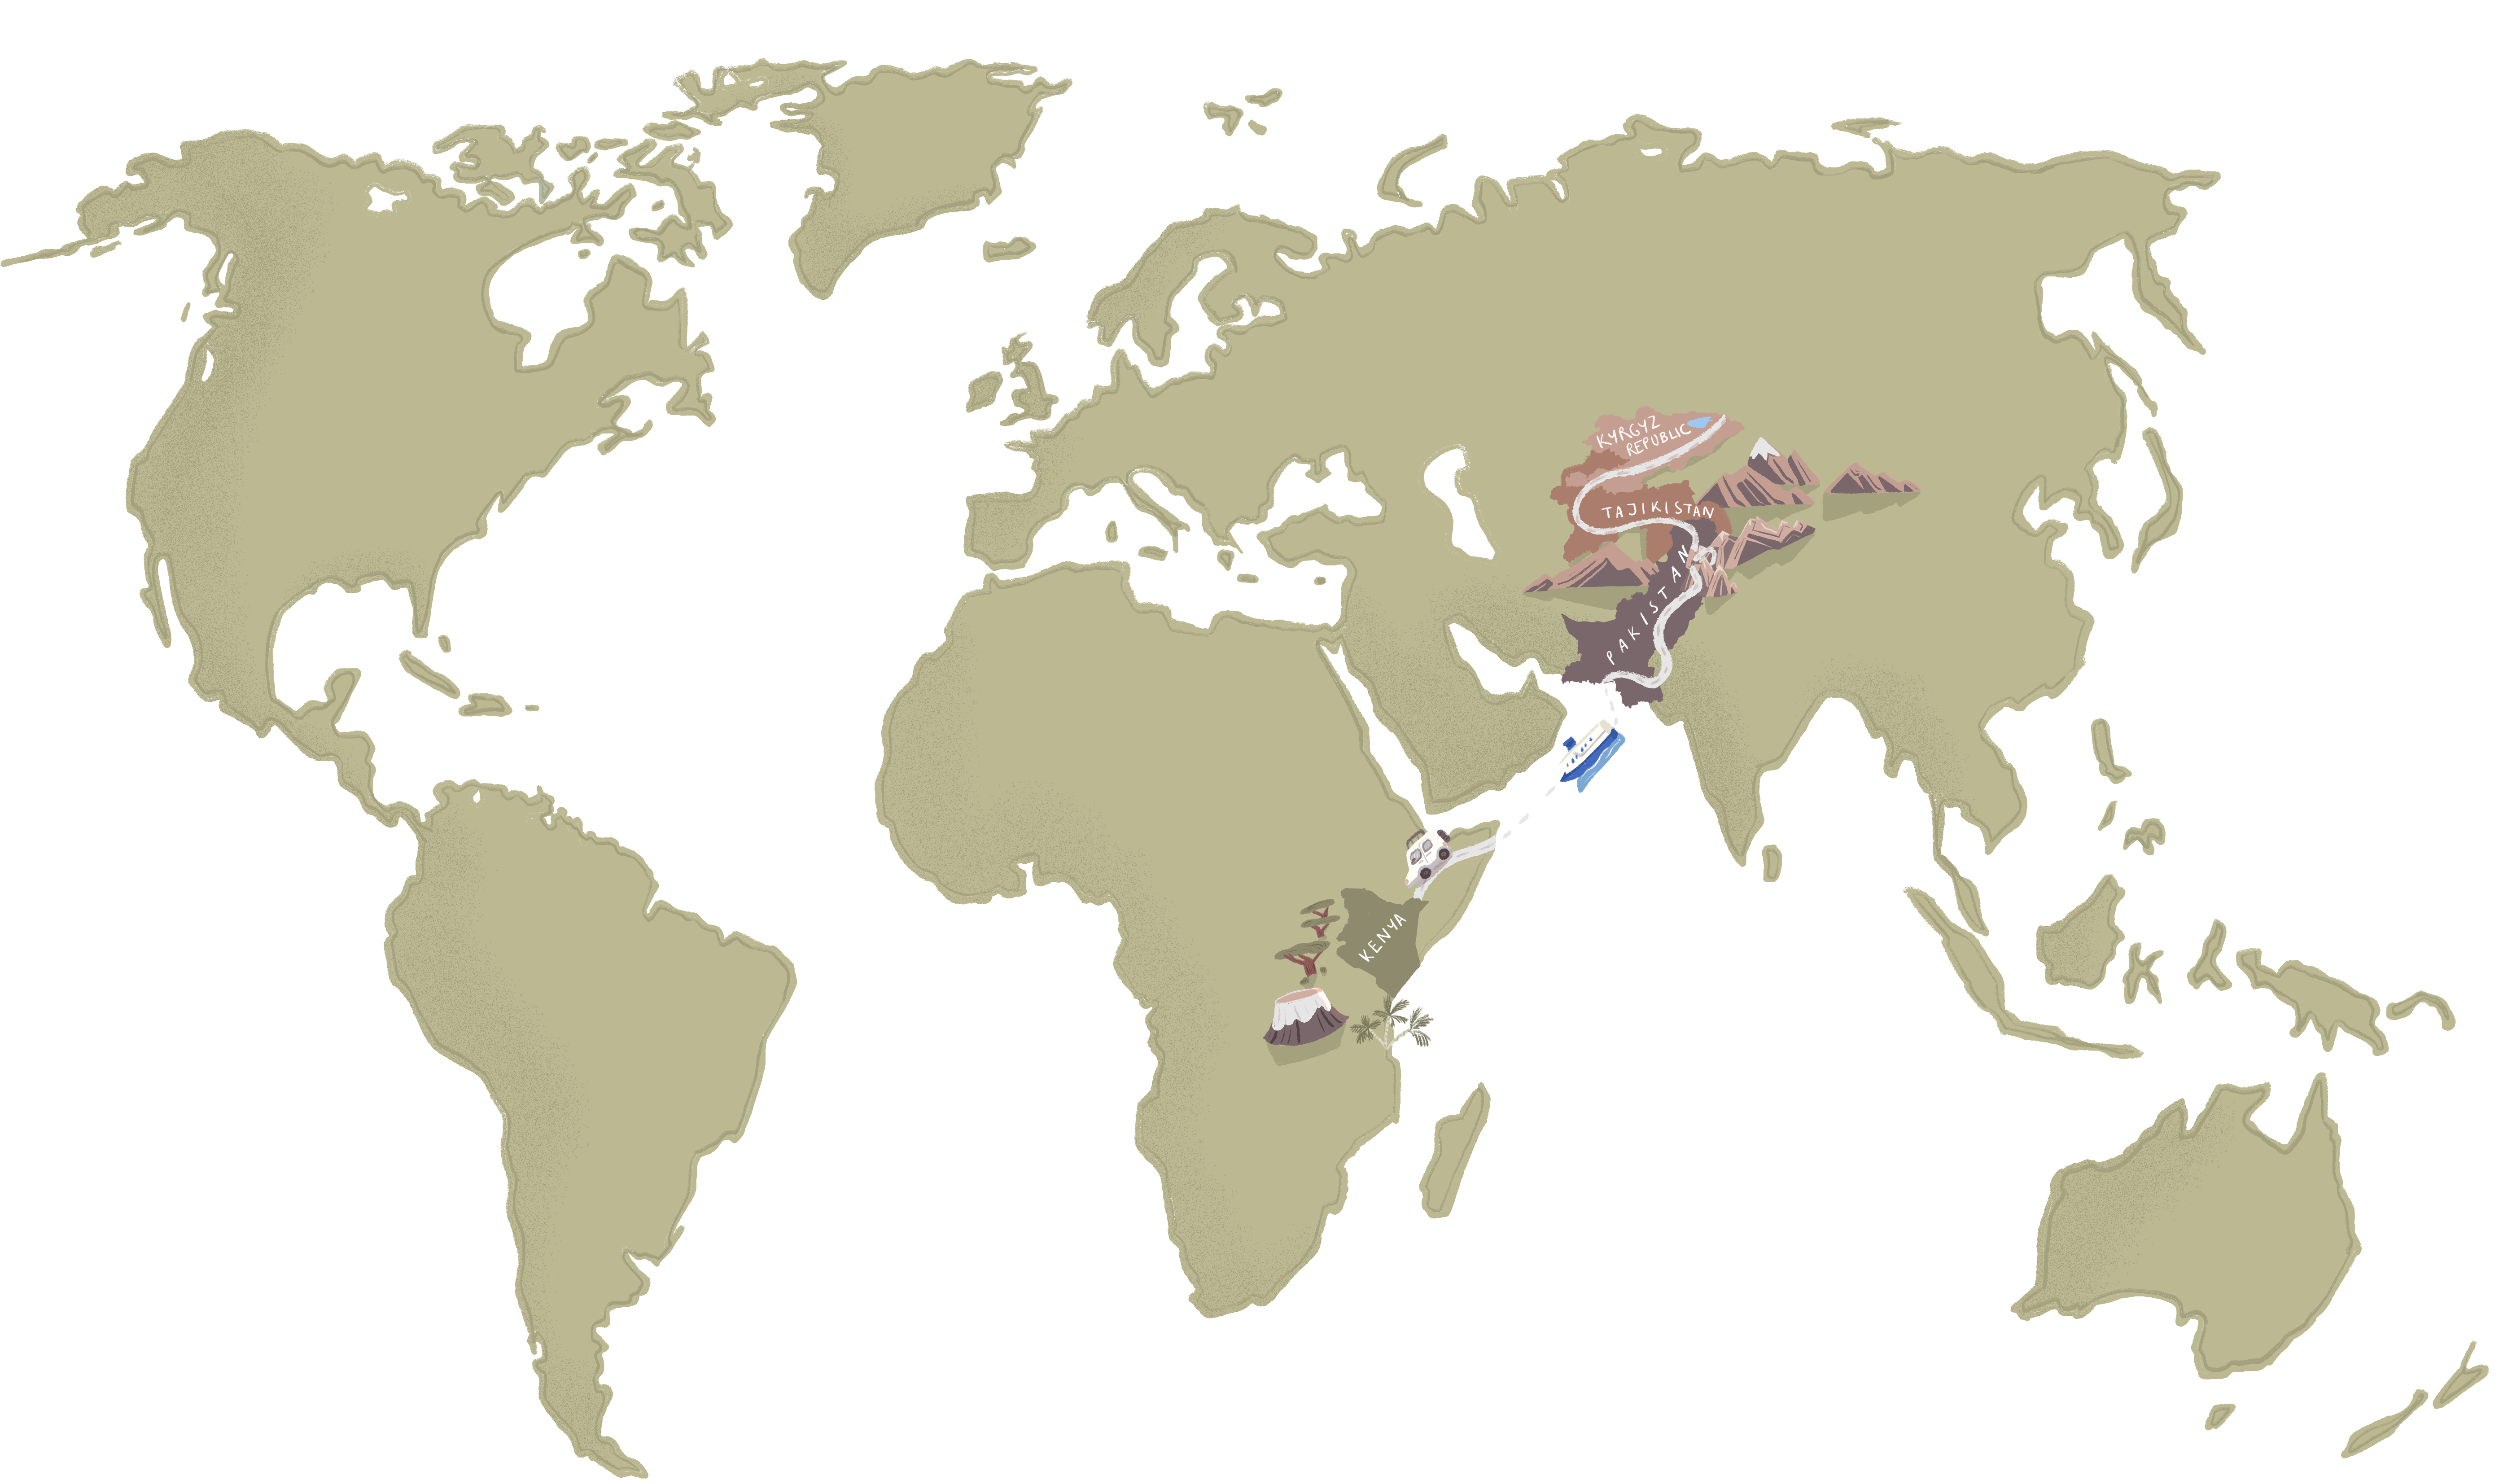 Illustrated world map with Kyrgyz Republic, Tajikistan, Pakistan, and Kenya highlighted with a road running between them